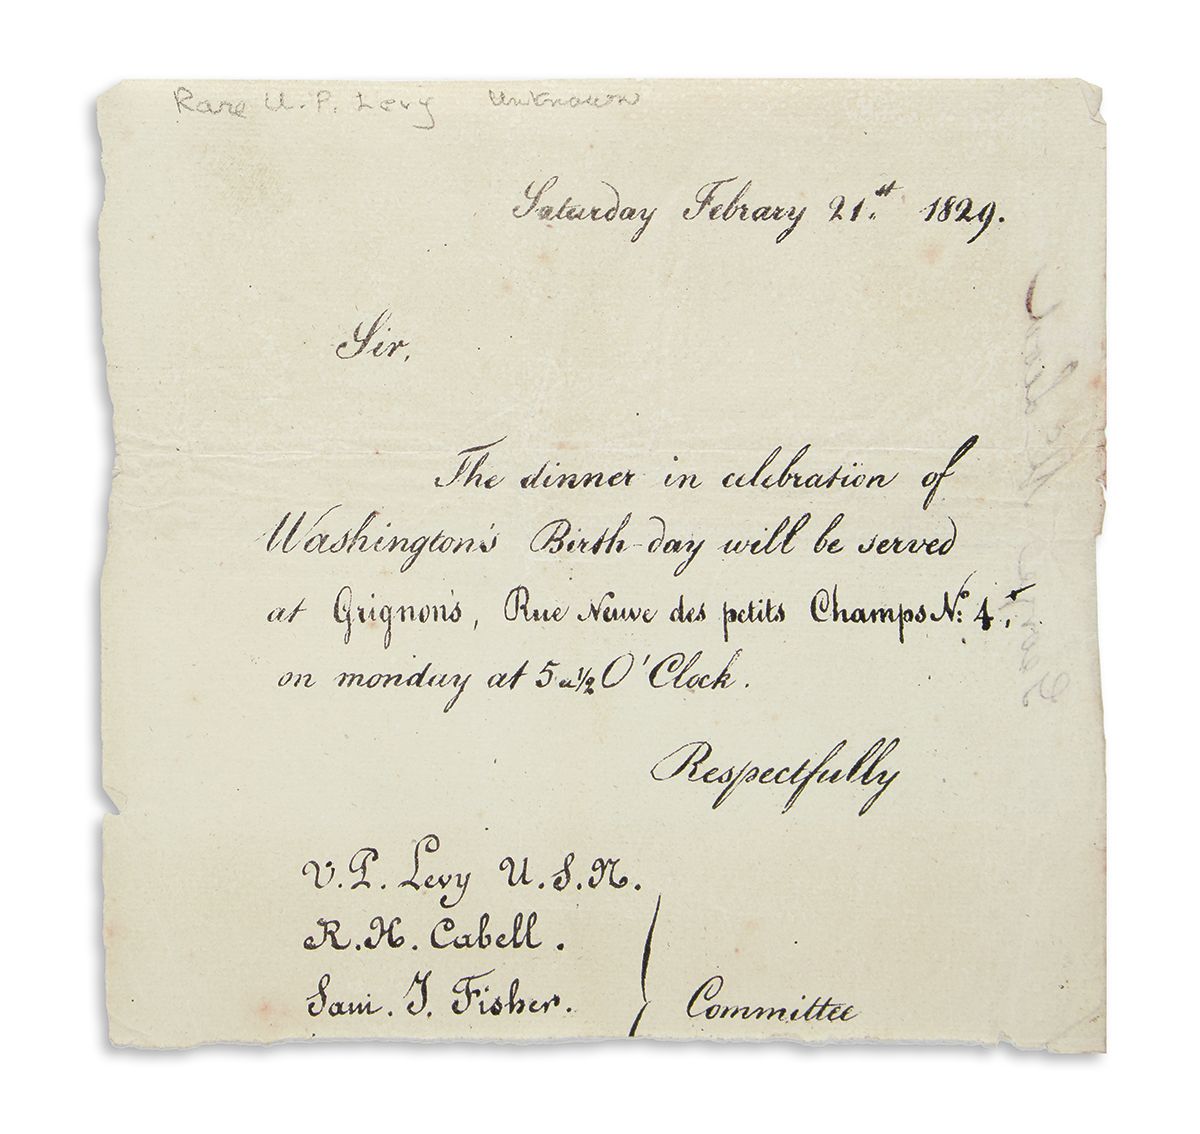 Printed Invitation to President’s Day Dinner from Uriah P. Levy